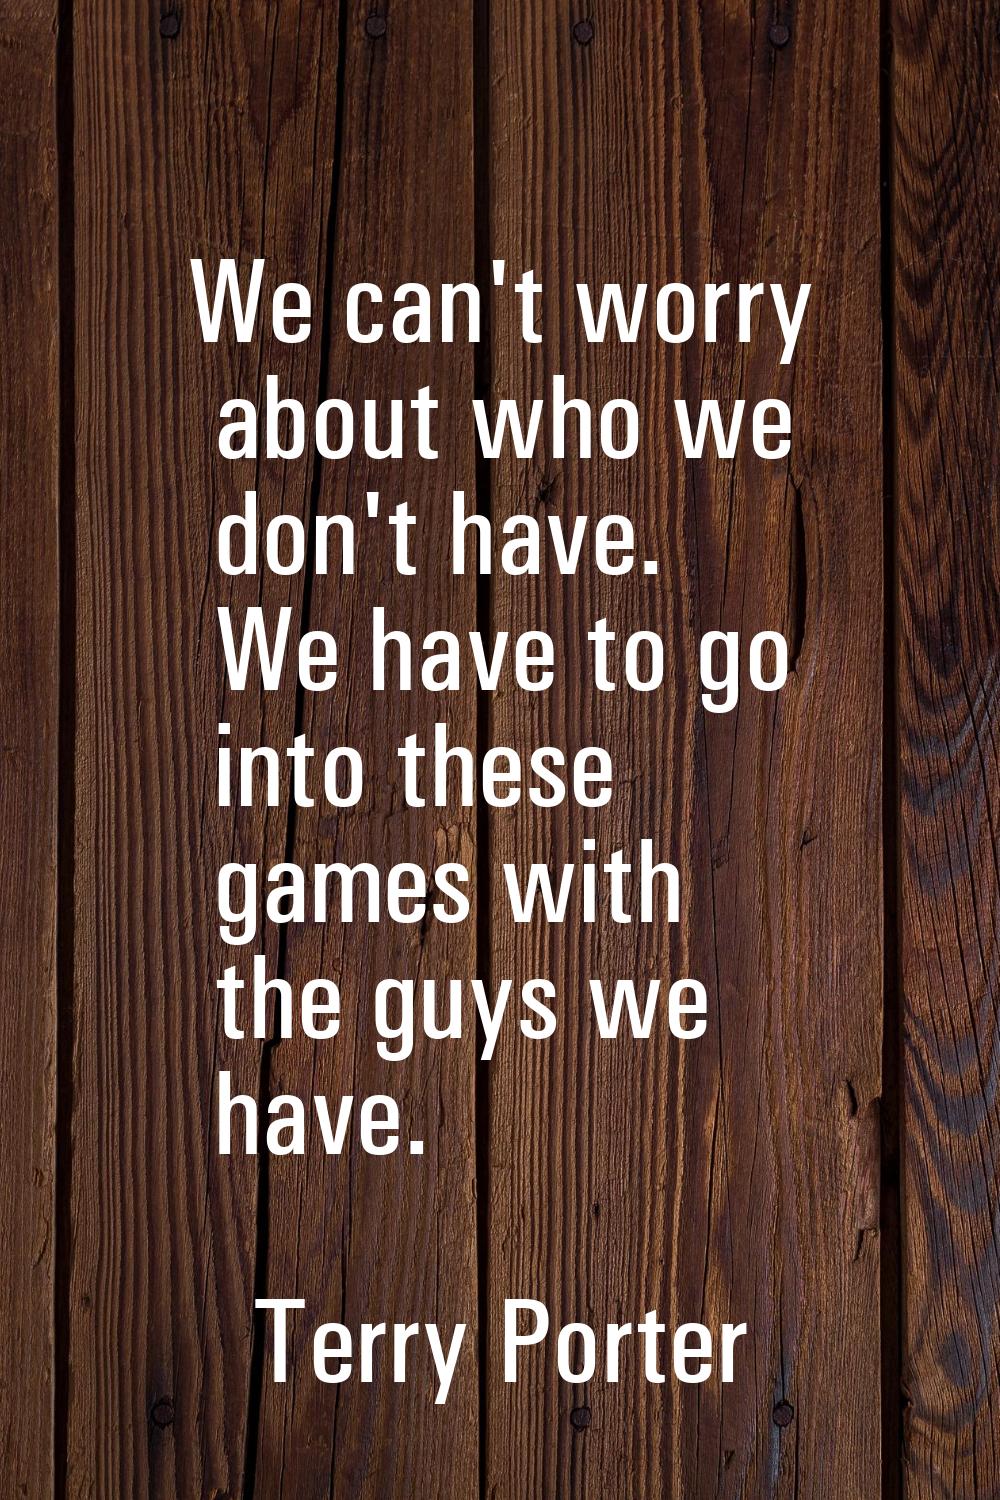 We can't worry about who we don't have. We have to go into these games with the guys we have.